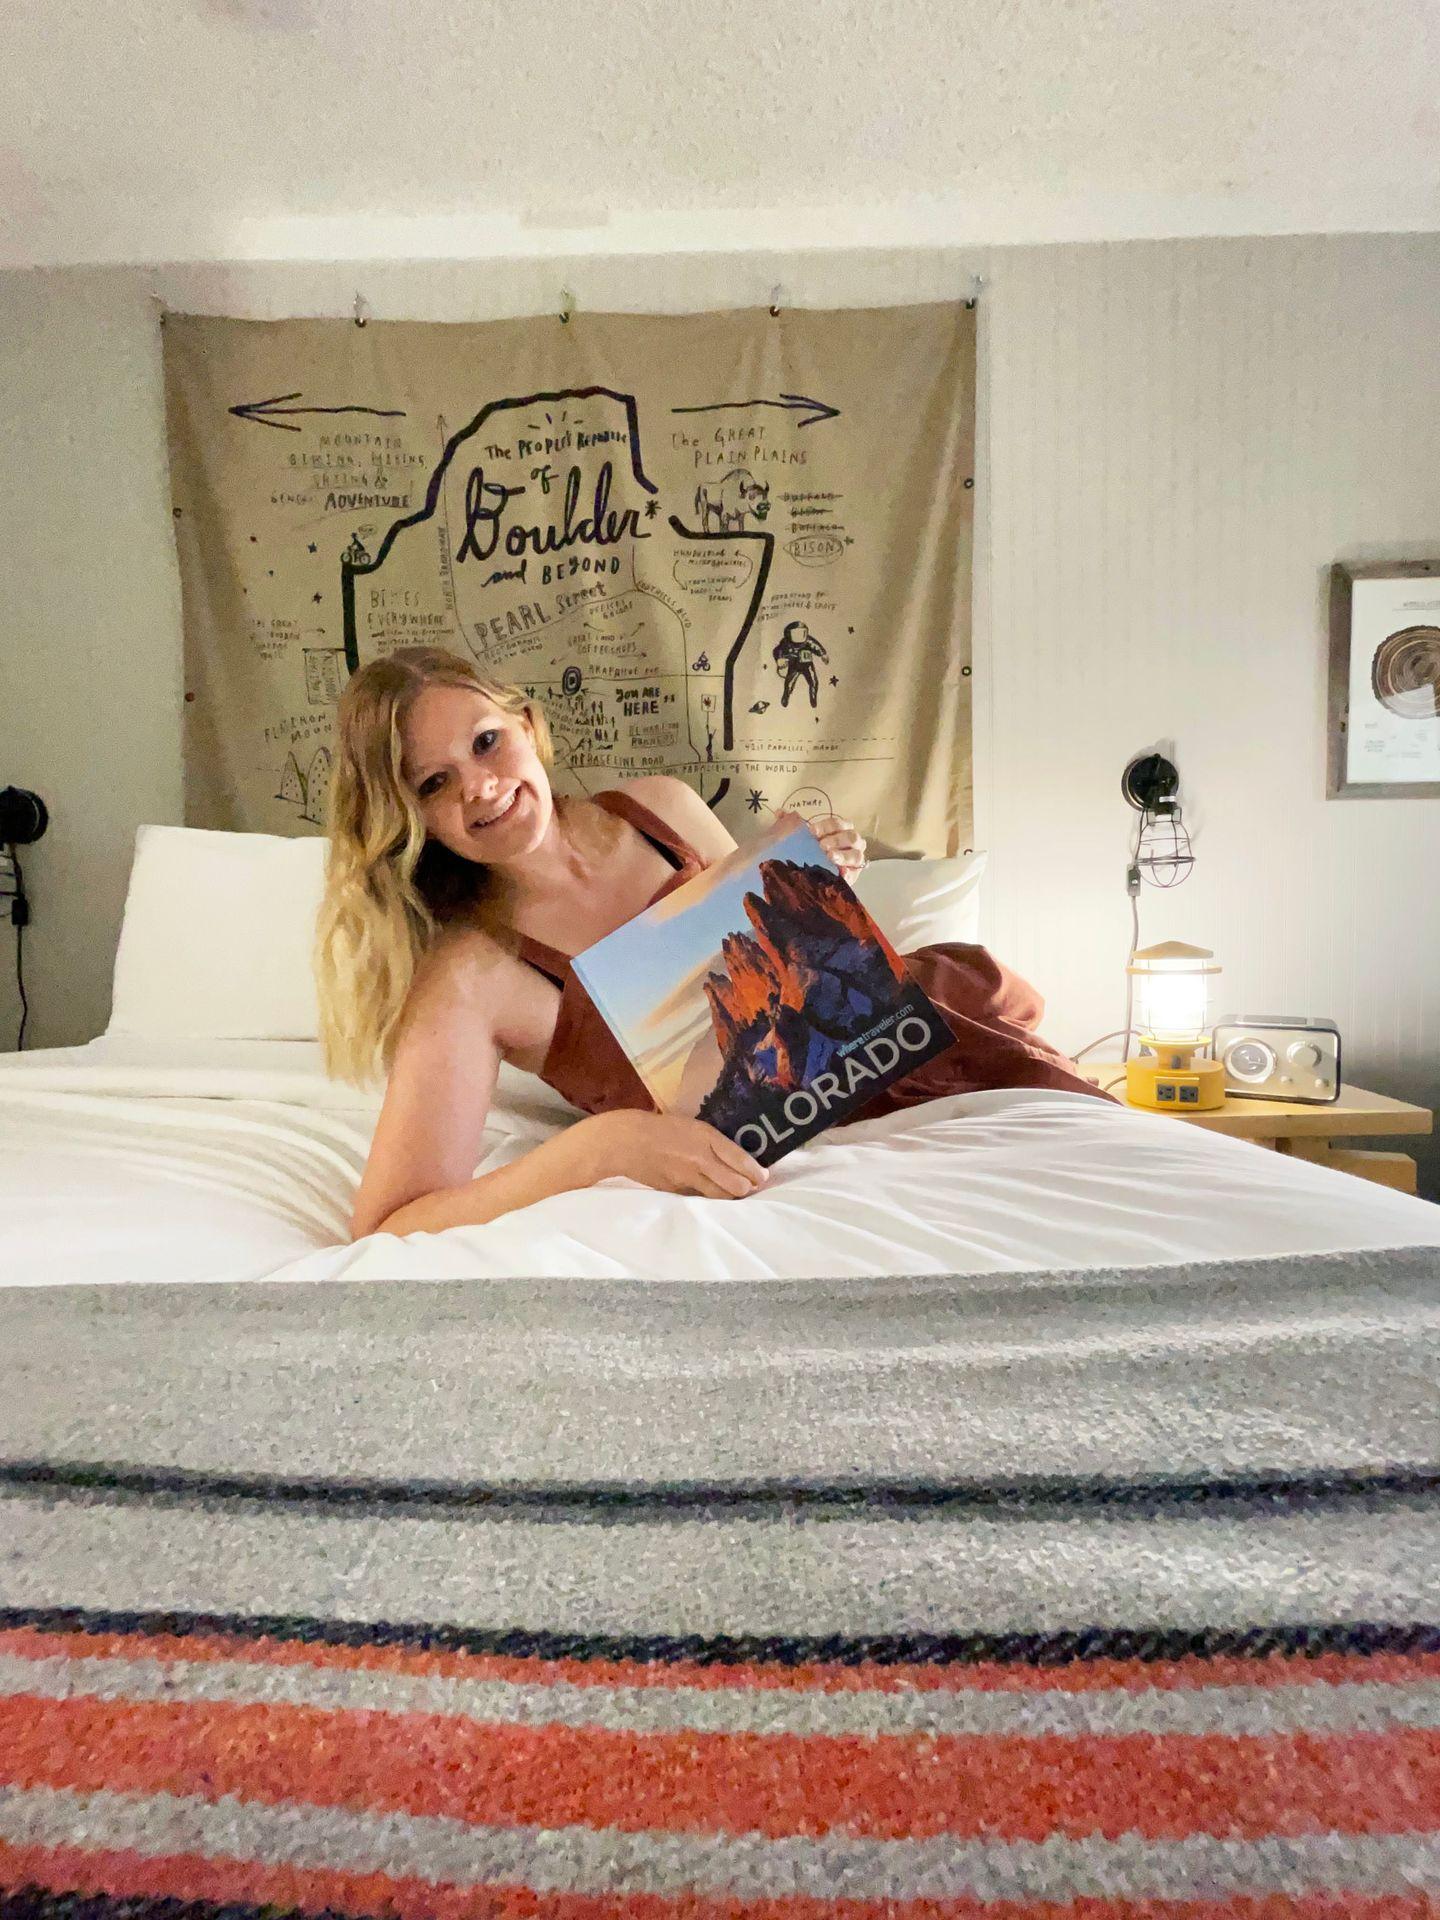 Lydia on a bed holding a Colorado book. There is an artistic map of Boulder on the wall in the background.